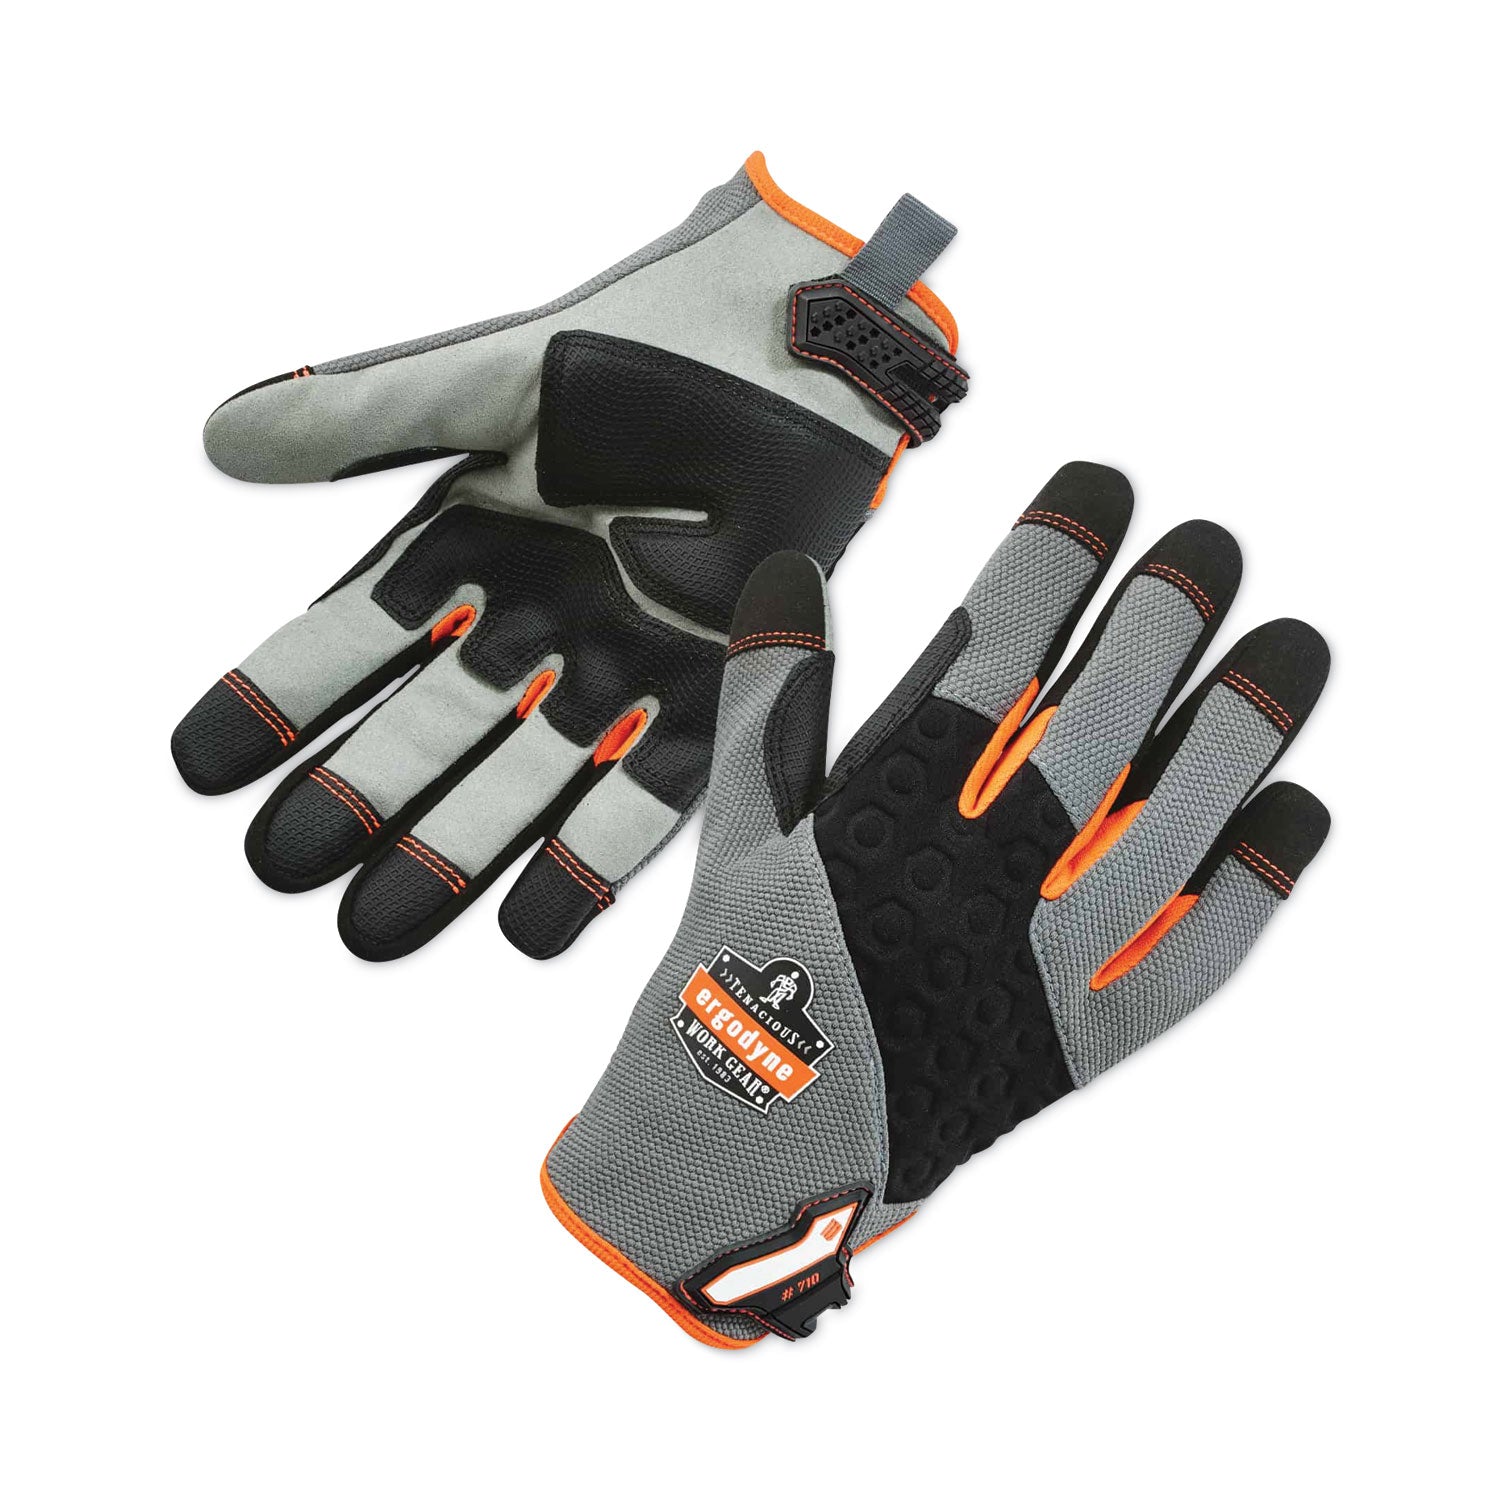 proflex-710-heavy-duty-mechanics-gloves-gray-small-pair-ships-in-1-3-business-days_ego17042 - 1